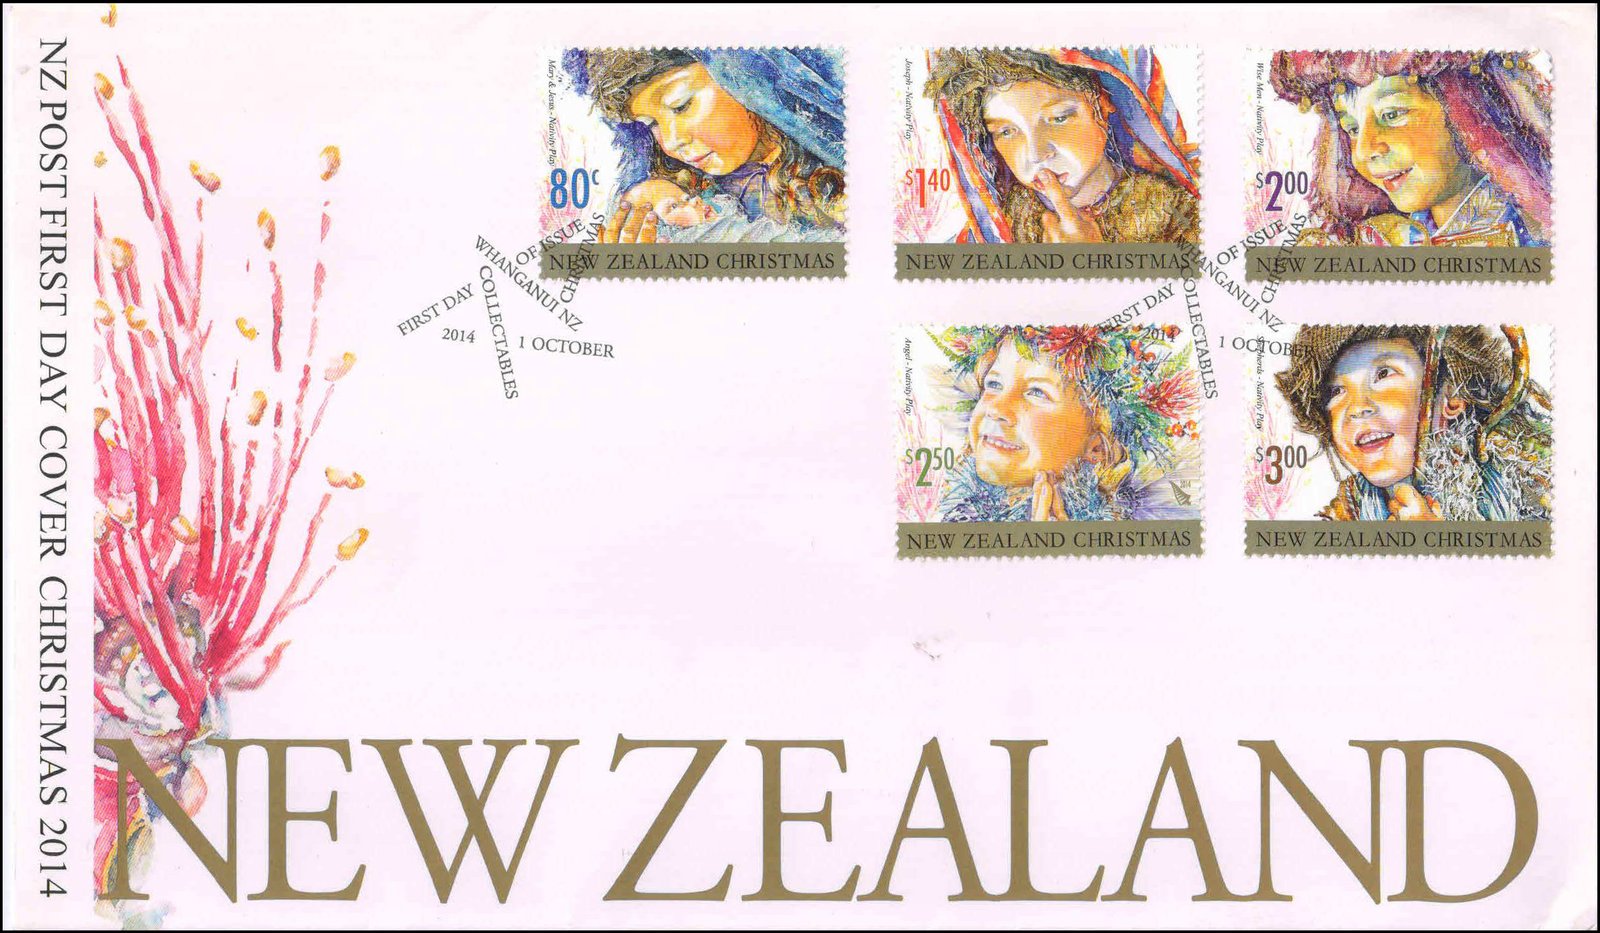 NEW ZEALAND 2014-Christmas, Children in Nativity Play, Set of 5 on F.D.C. Face $ 10.50, S.G. 3614-3618